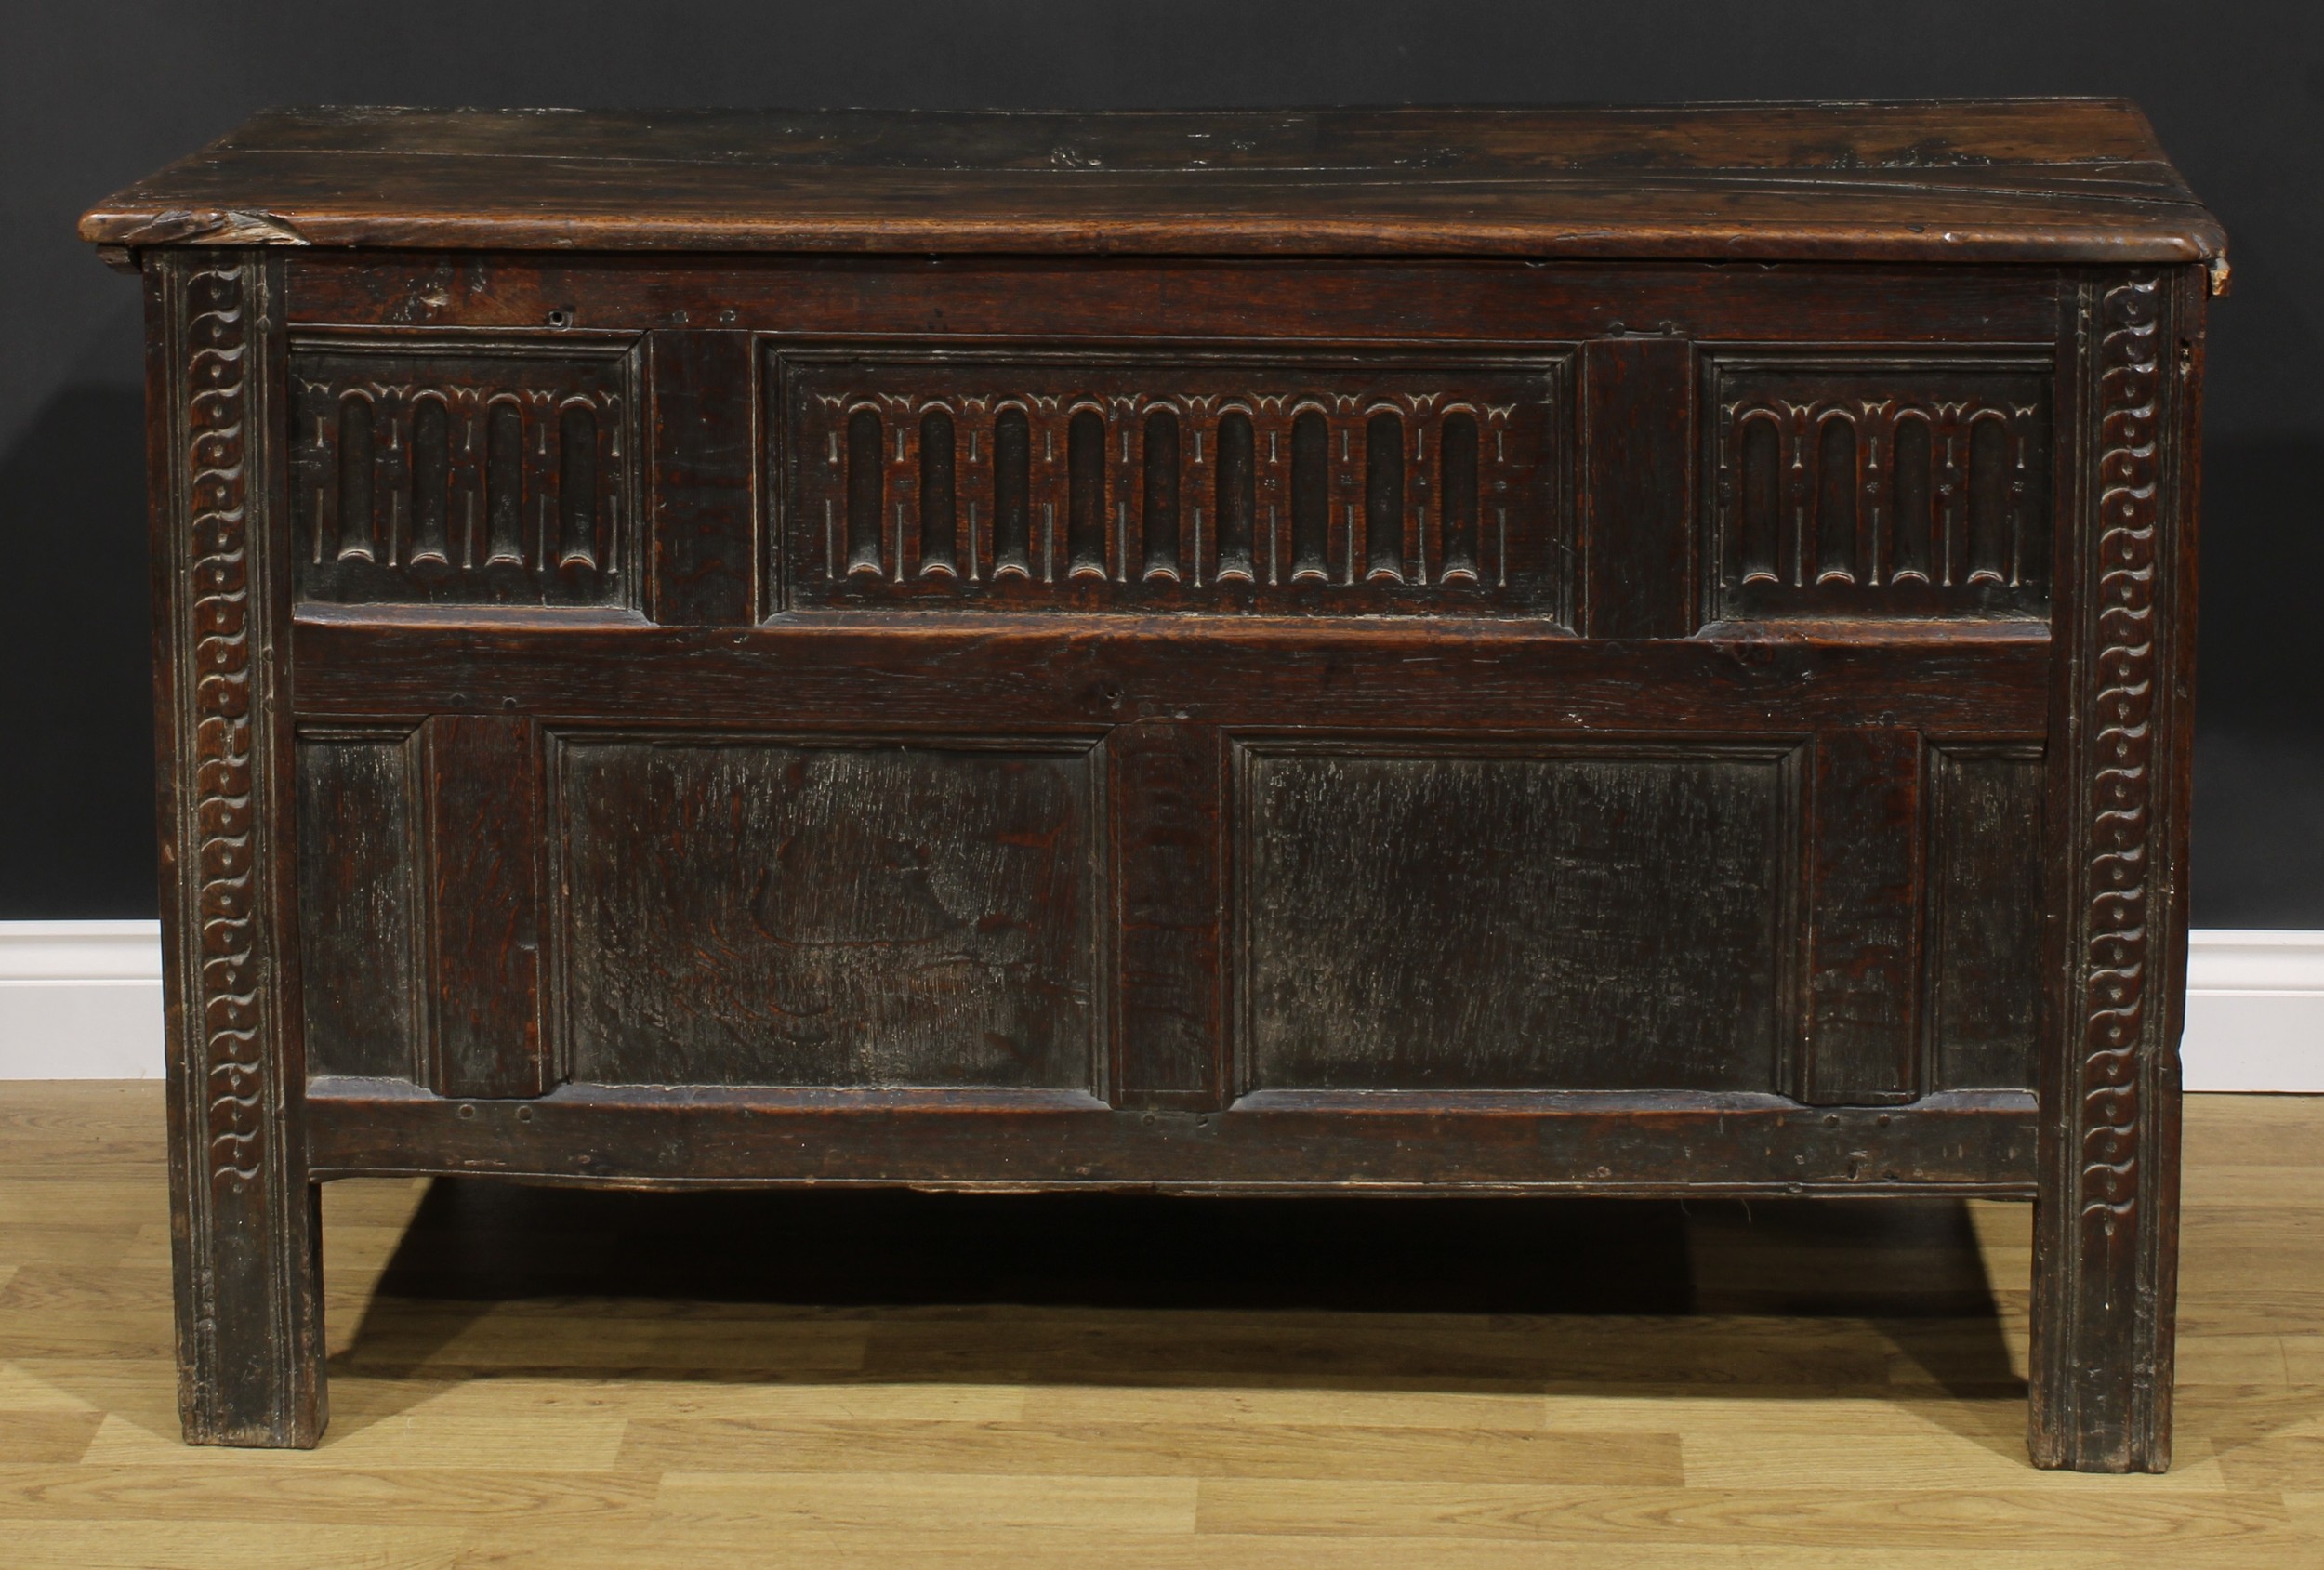 A late 17th century oak blanket chest, hinged top above a nulled panel front, the stiles carved with